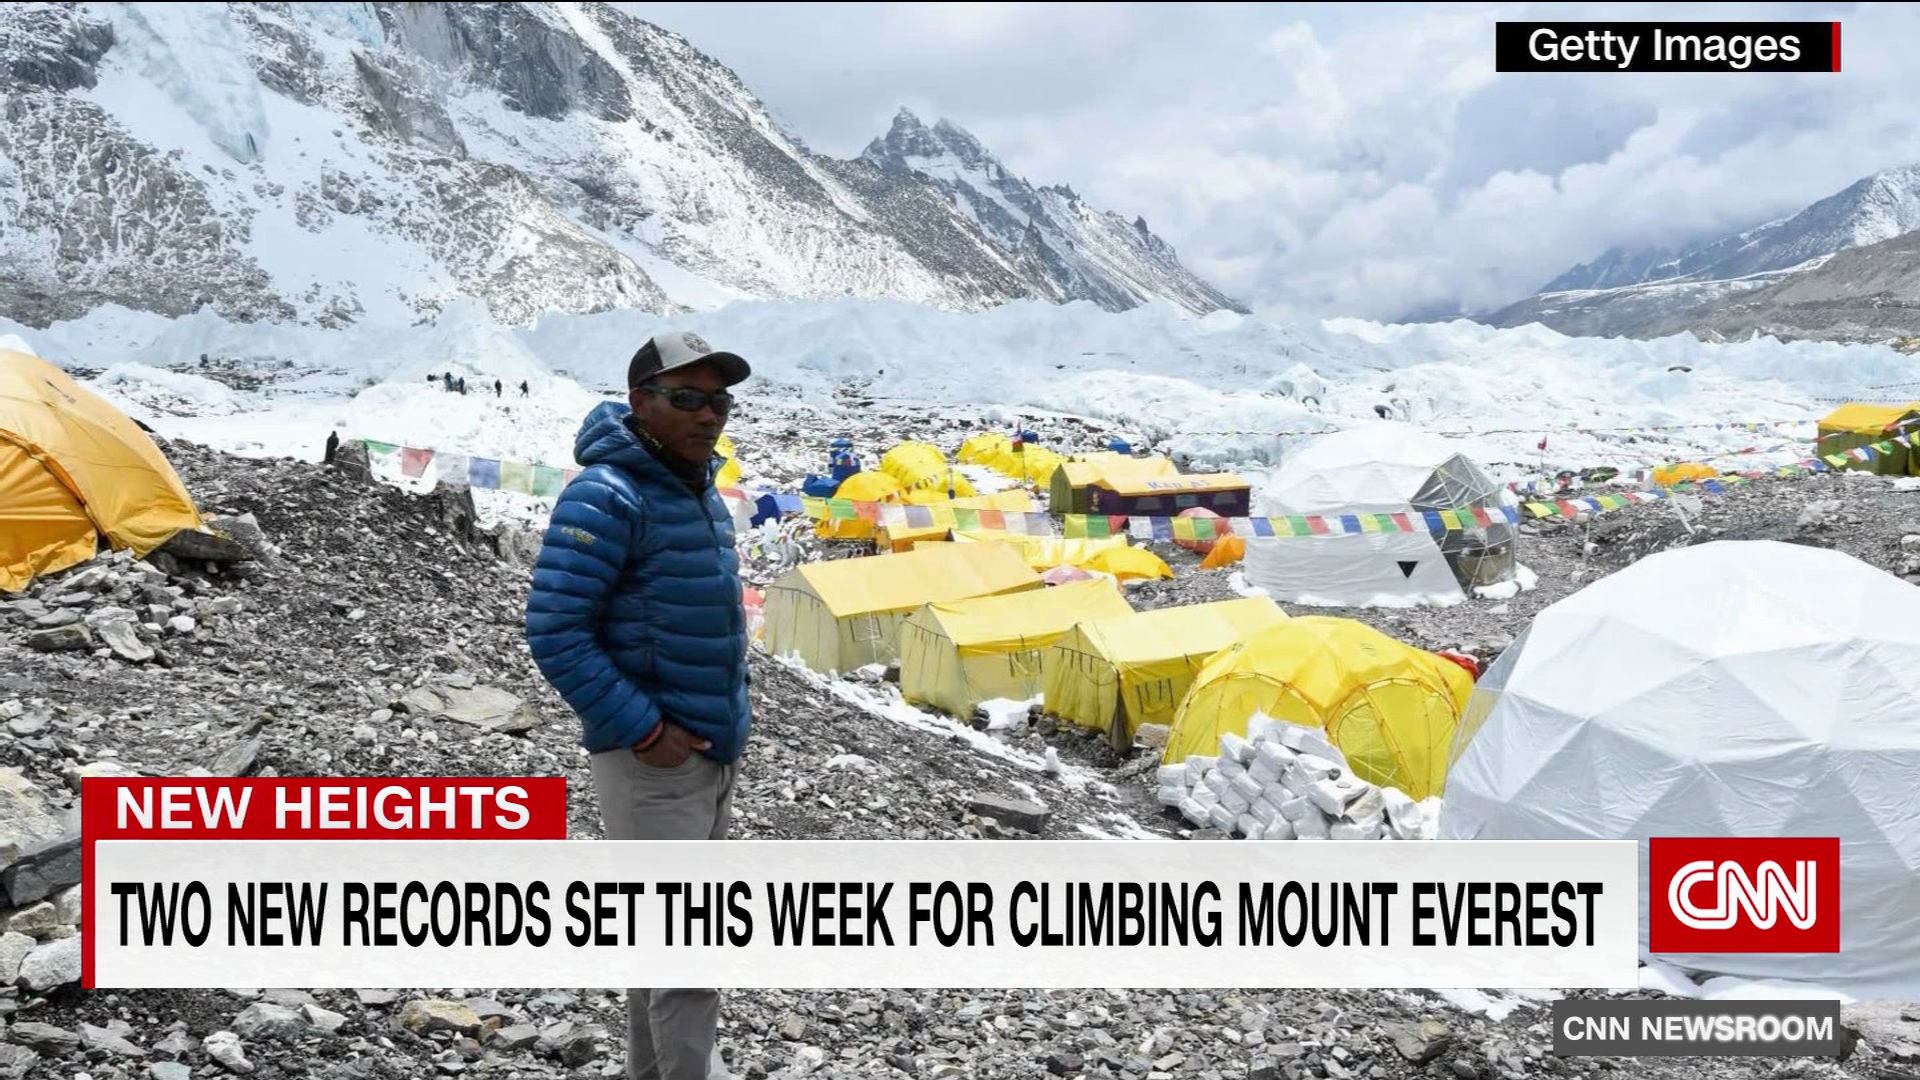 Two new records set this week for climbing Mount Everest